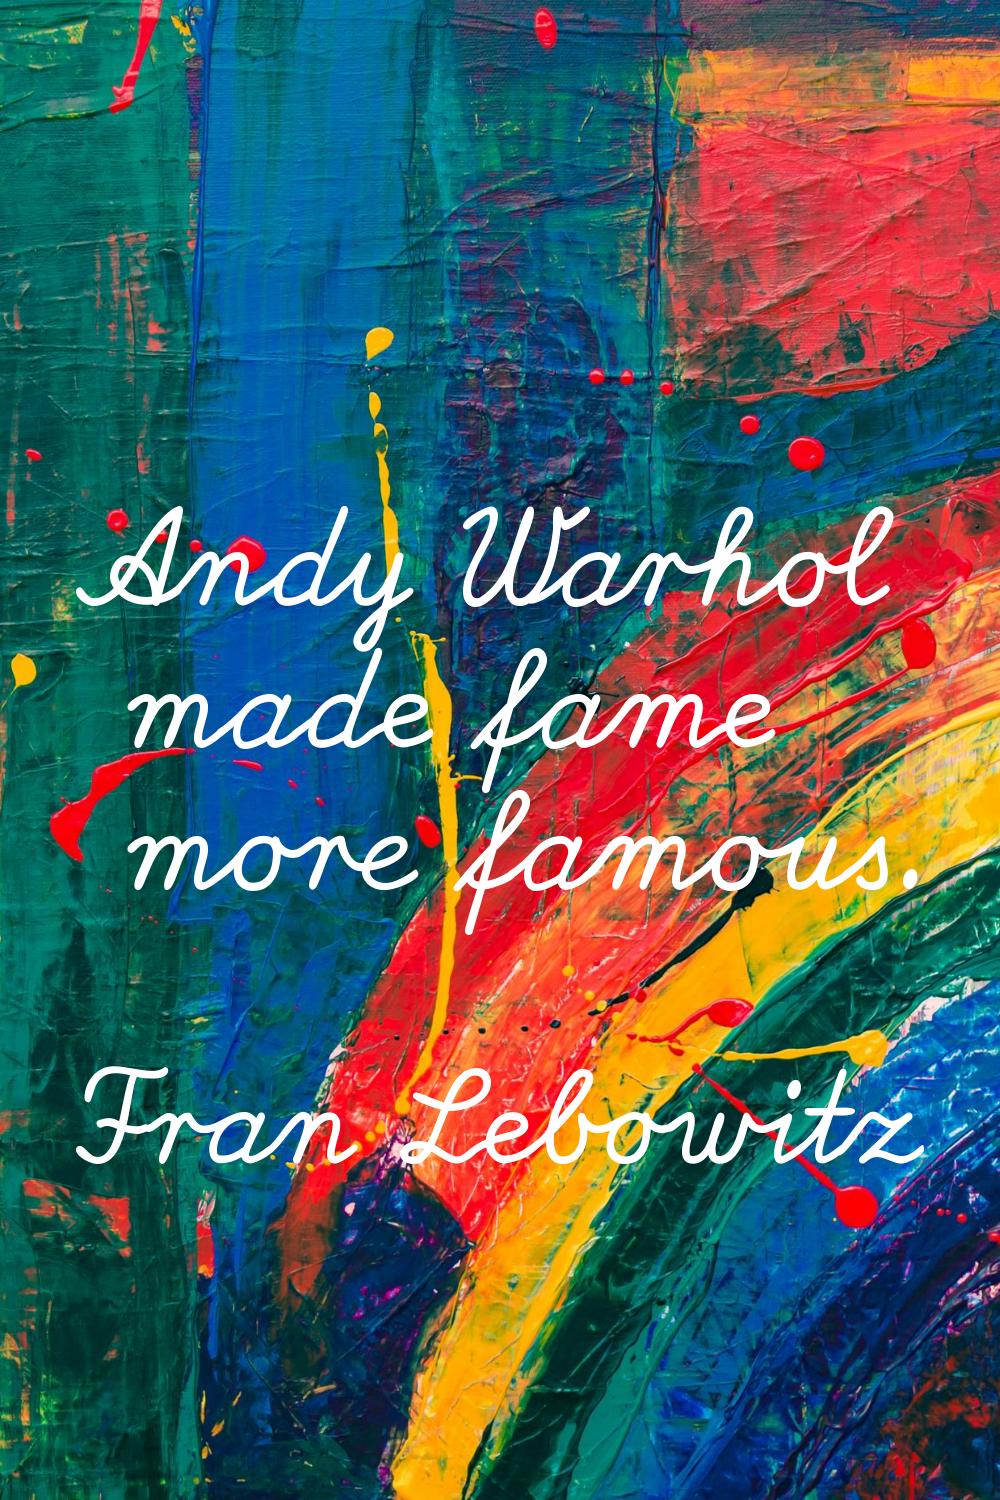 Andy Warhol made fame more famous.